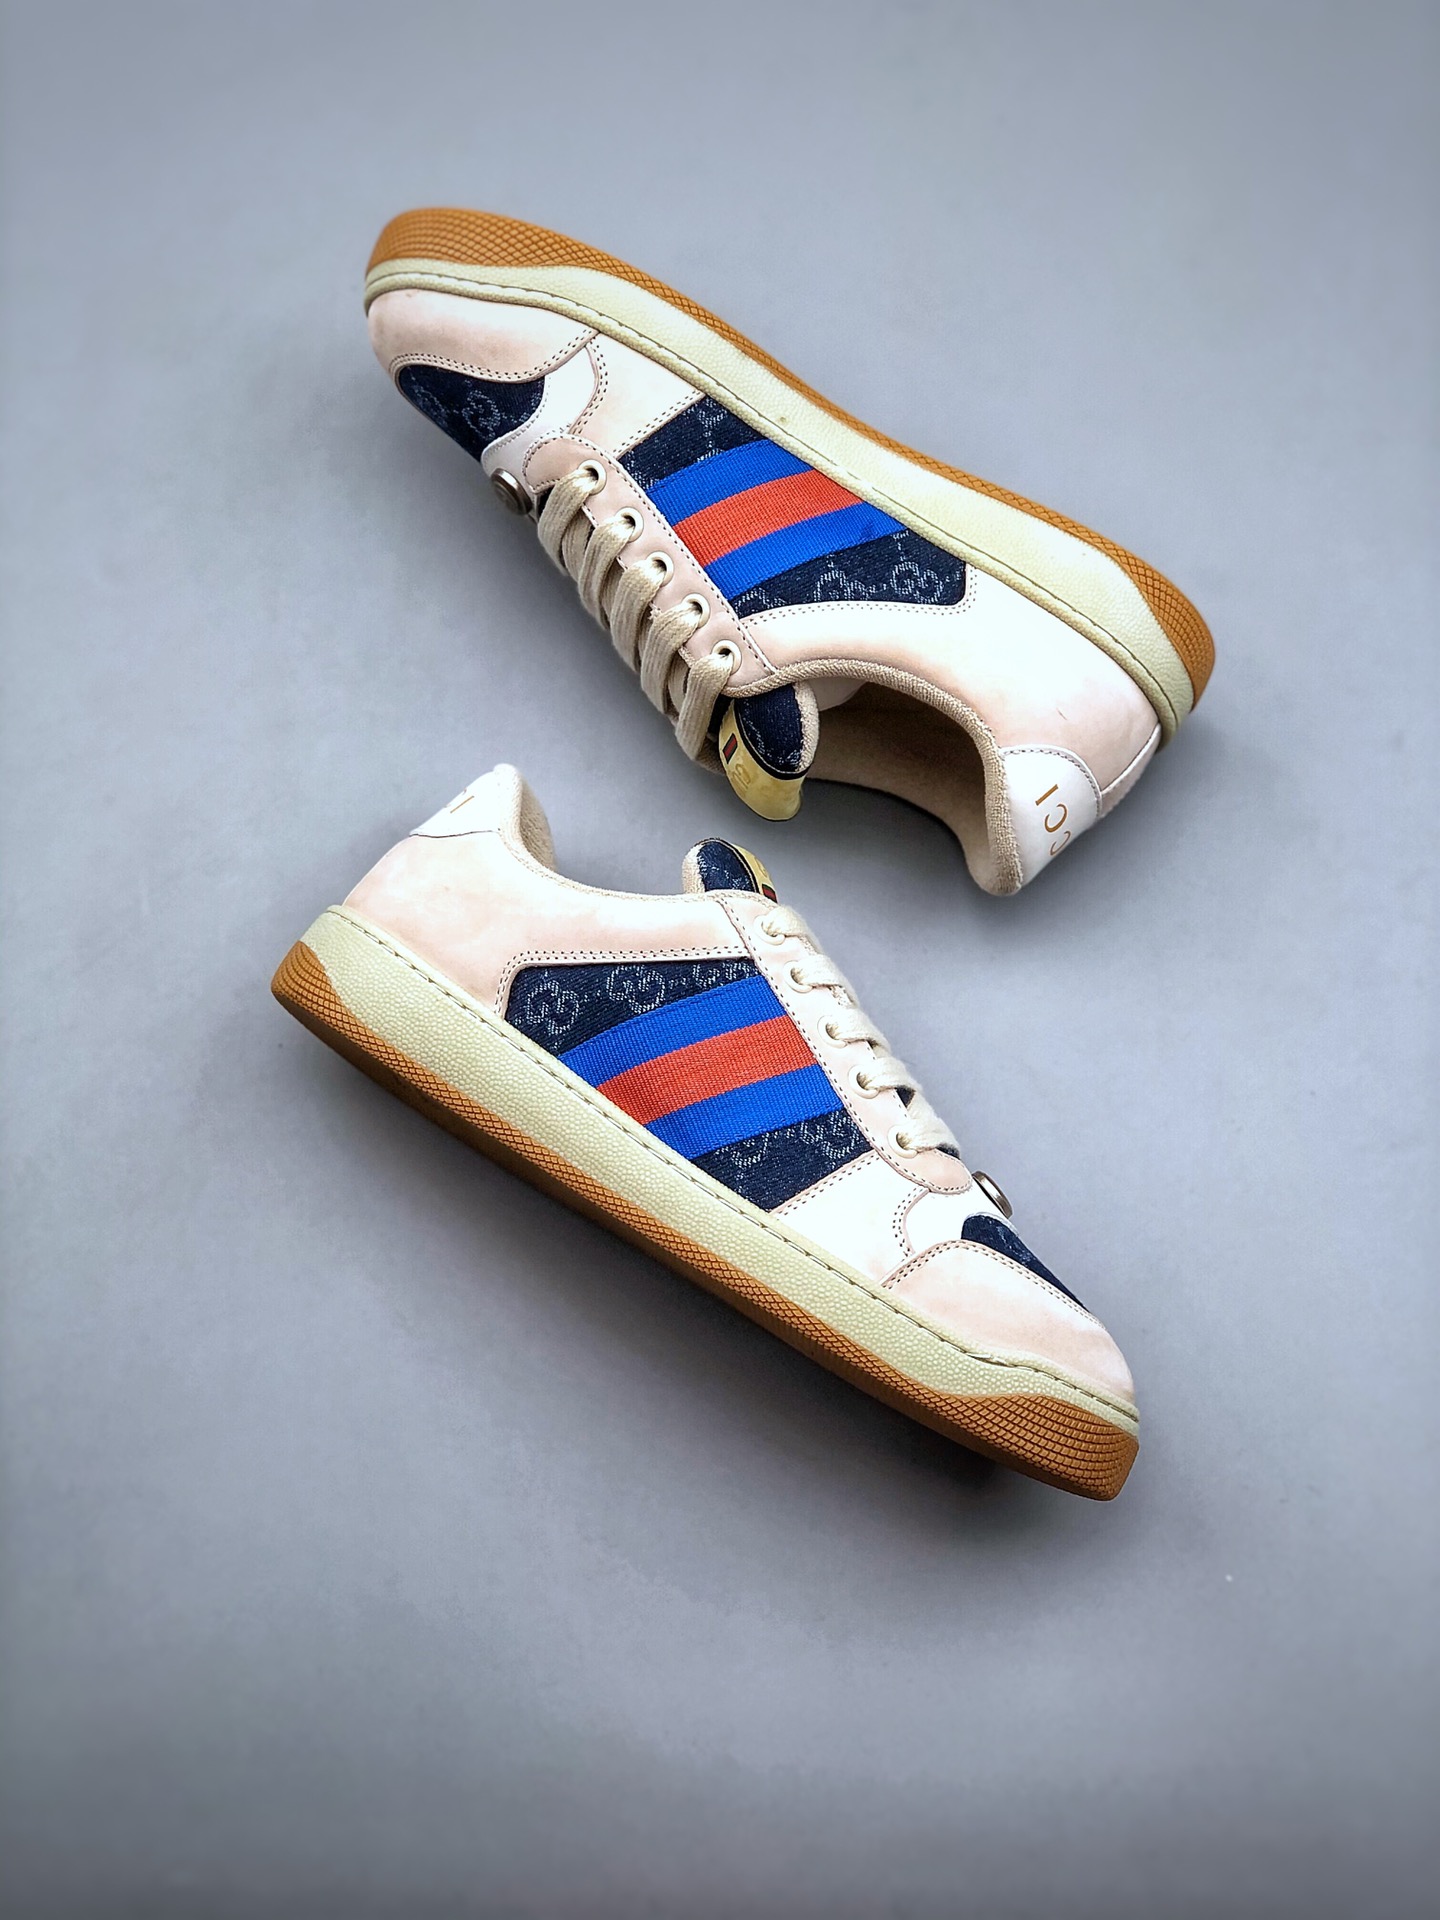 Pure original level, no copywriting routines, quality speak #New color matching Gucci Distressed Screener sneaker small dirty shoes series